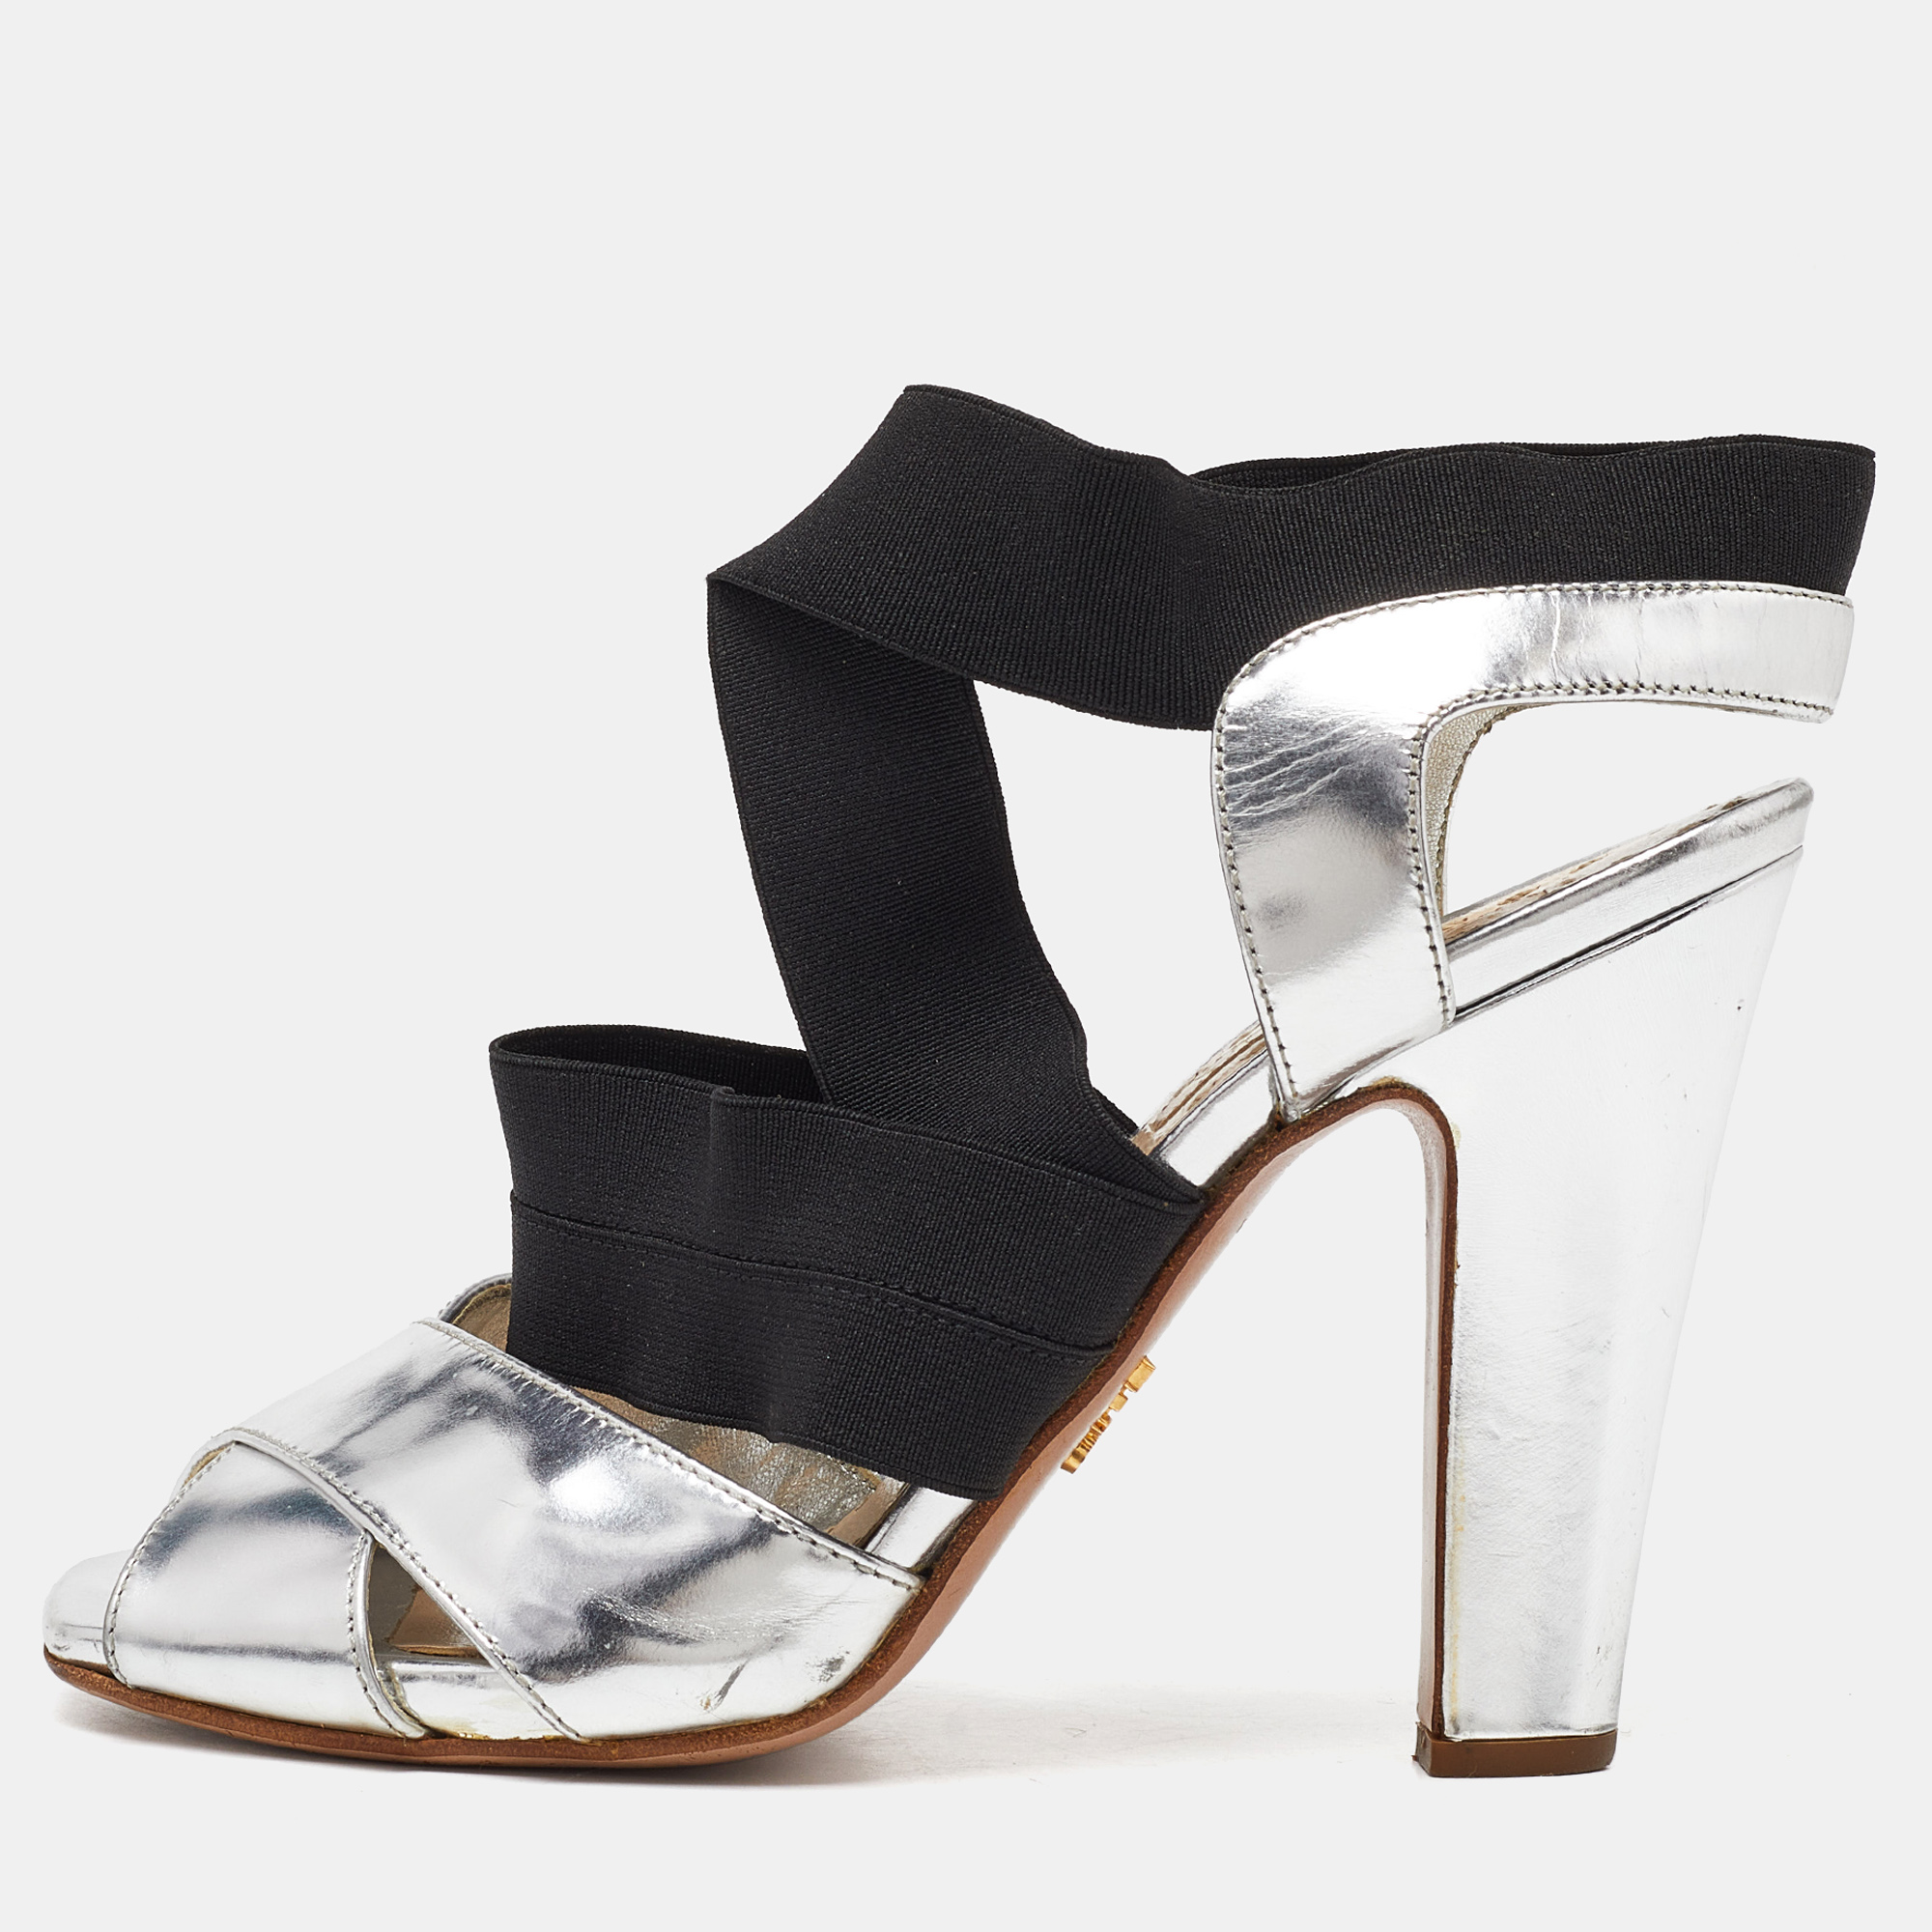 Prada black/silver leather and fabric strappy open toe sandals size 37